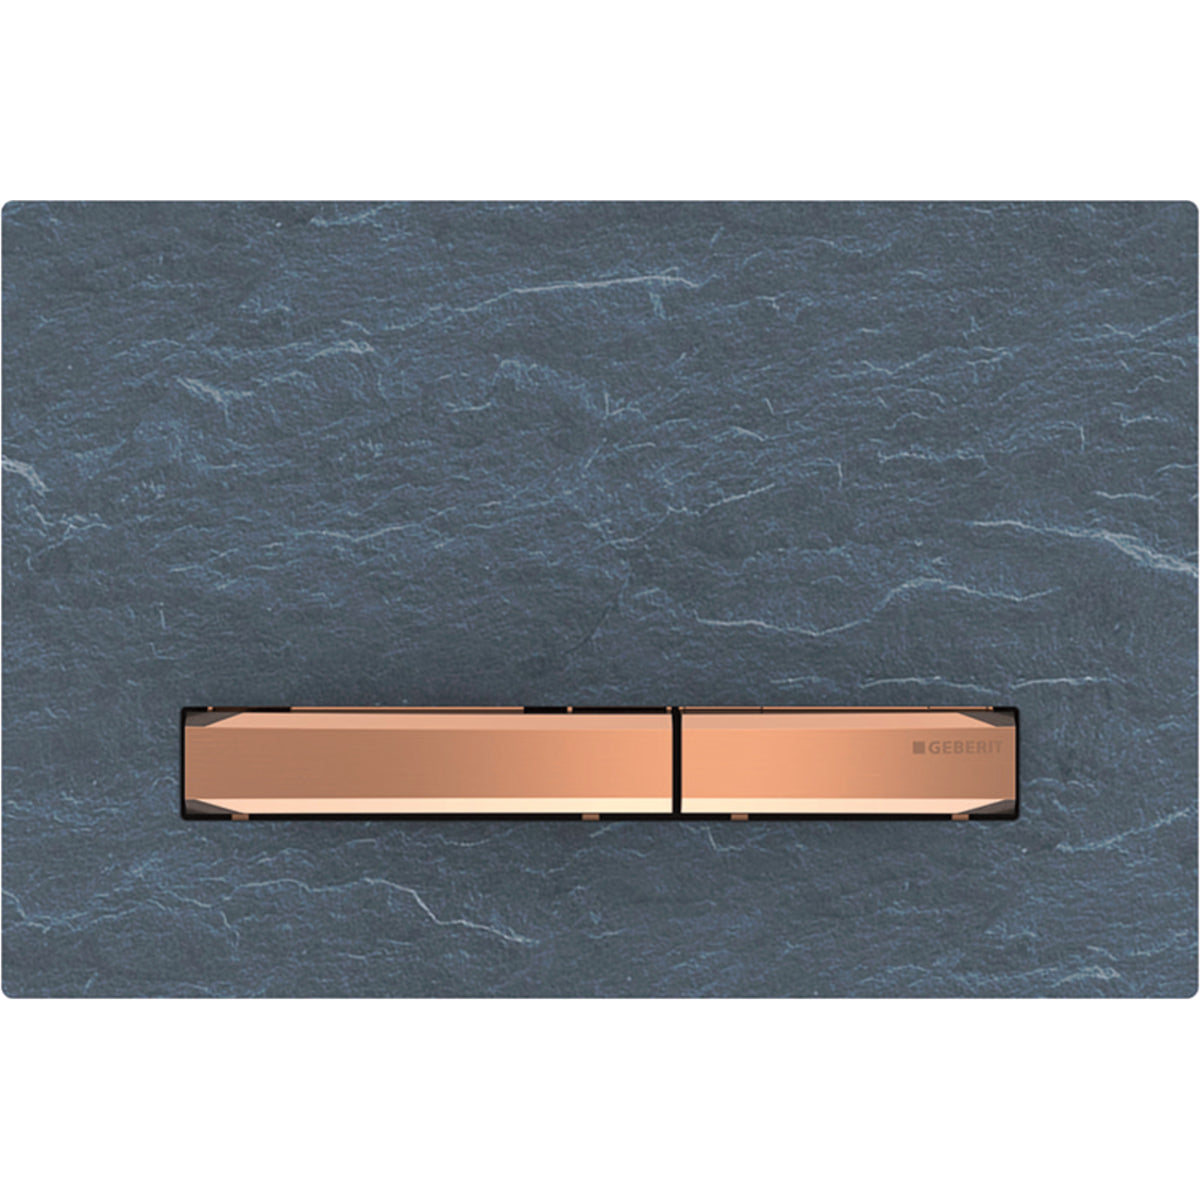 Geberit 115.670.JM.2- Geberit actuator plate Sigma50 for dual flush, metal colour red gold: red gold, Mustang slate - FaucetExpress.ca